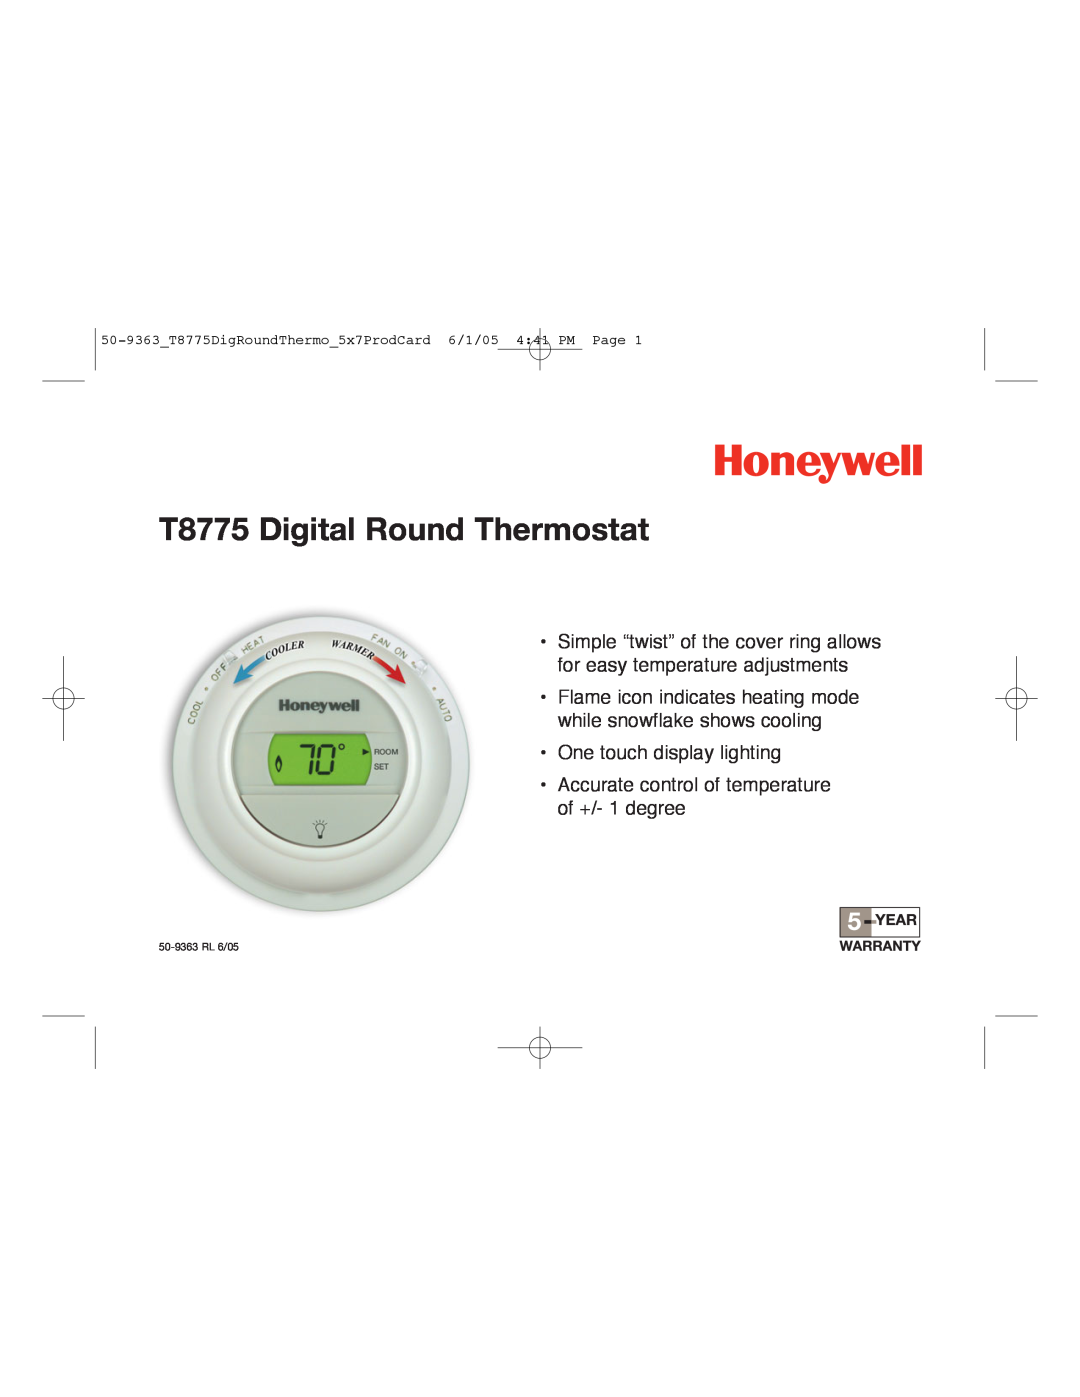 Honeywell manual T8775 Digital Round Thermostat, Flame icon indicates heating mode while snowflake shows cooling 